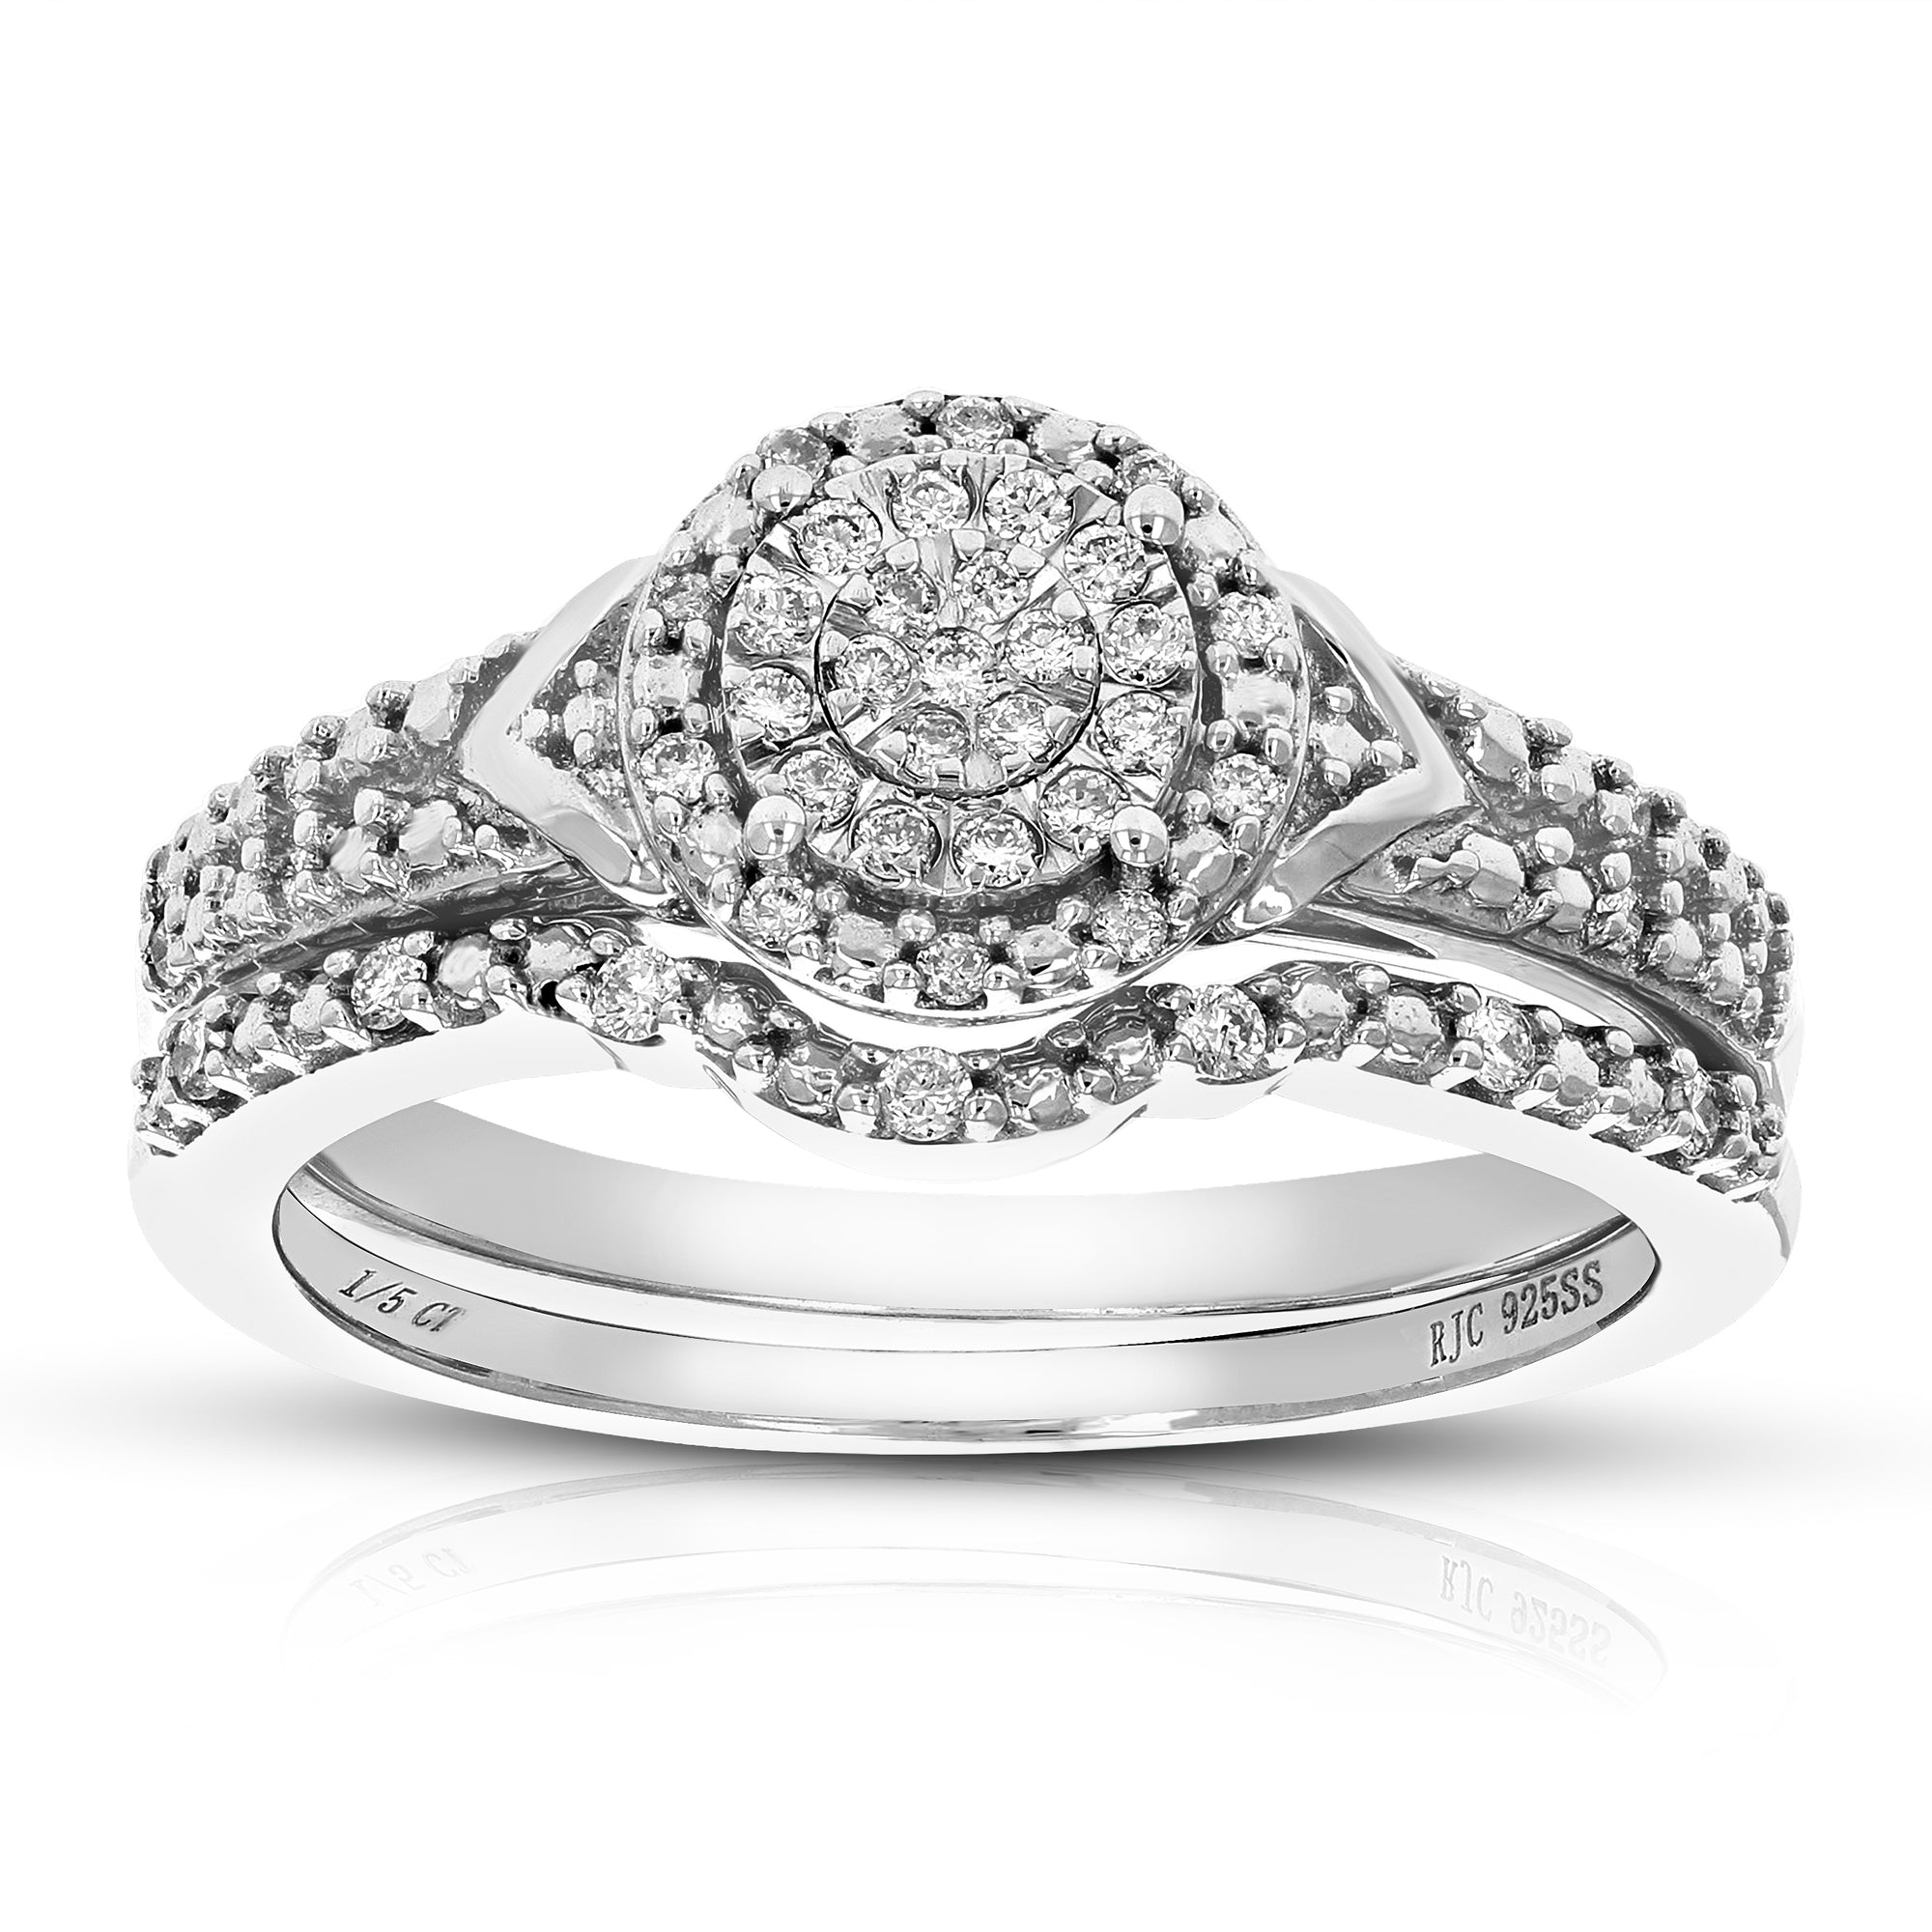 1/5 cttw Wedding Engagement Ring Bridal Set, Round Lab Grown Diamond Ring for Women in .925 Sterling Silver, Prong Setting, Size 6-8